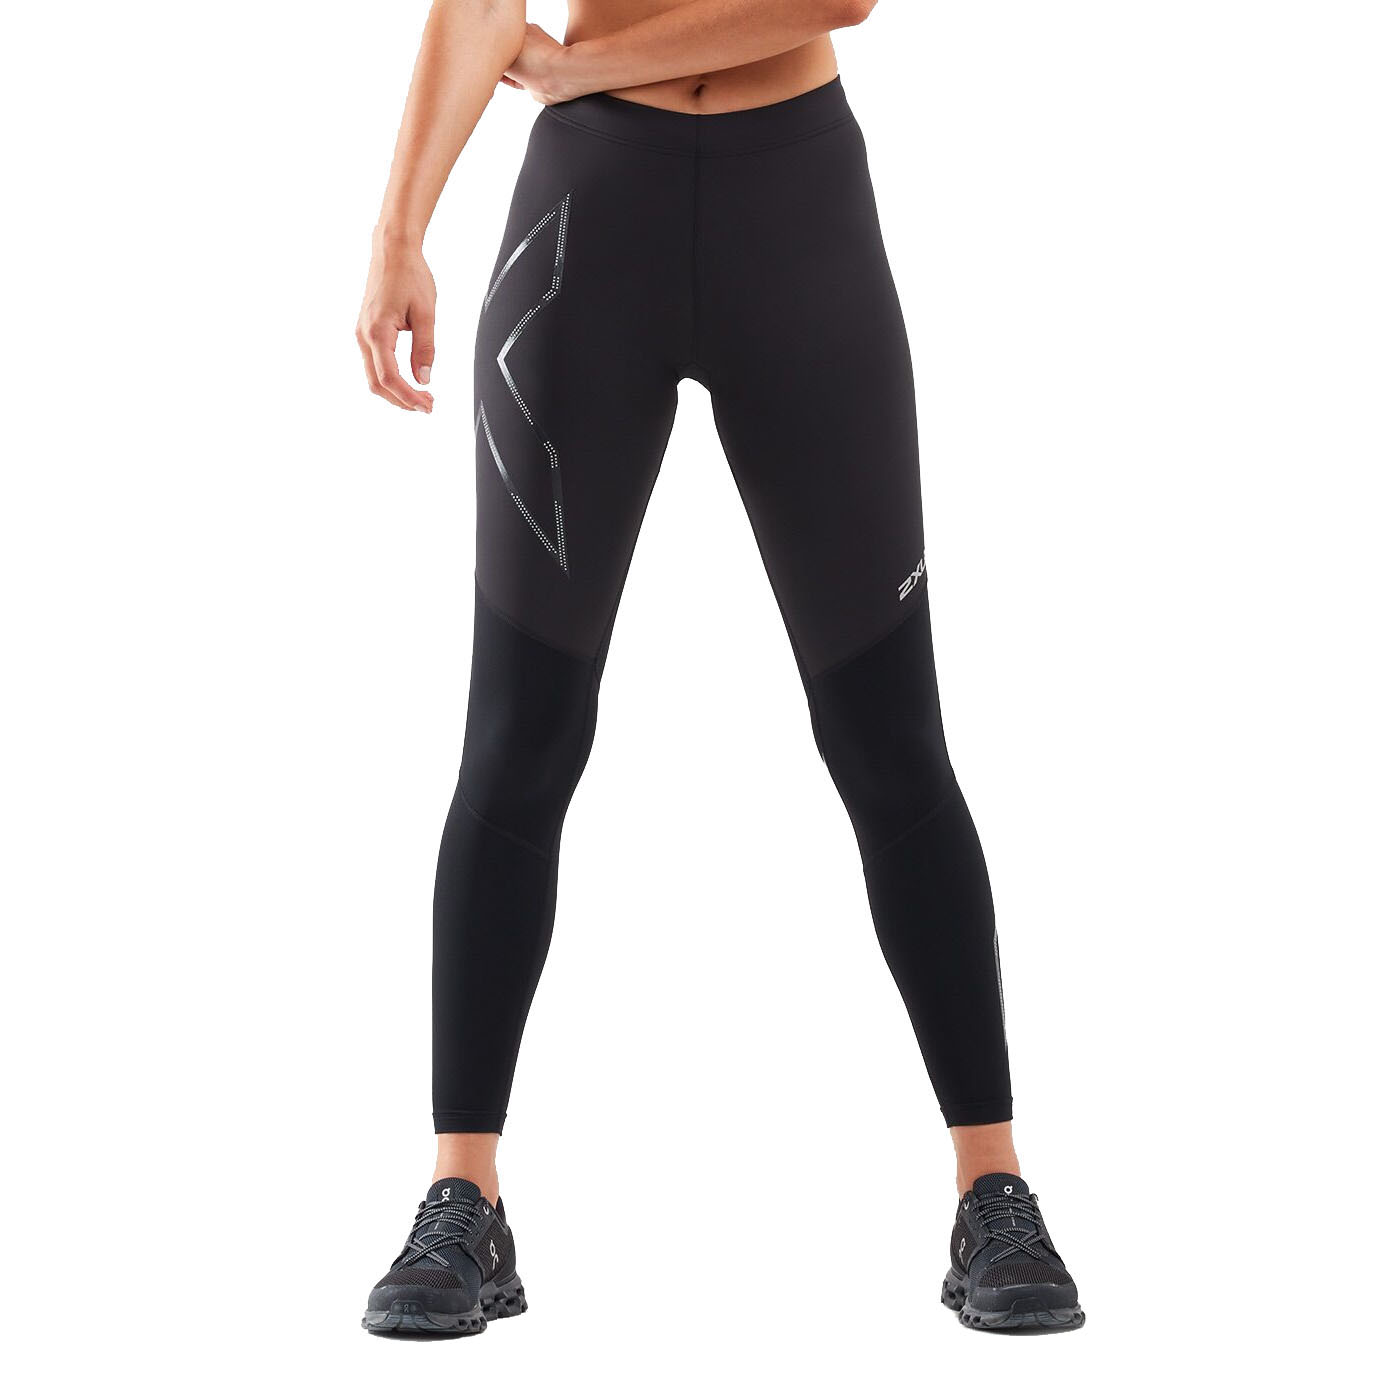 Women's Ignition Shield Compression Tights BLACK/ BLACK REFLECTIVE, Buy  Women's Ignition Shield Compression Tights BLACK/ BLACK REFLECTIVE here